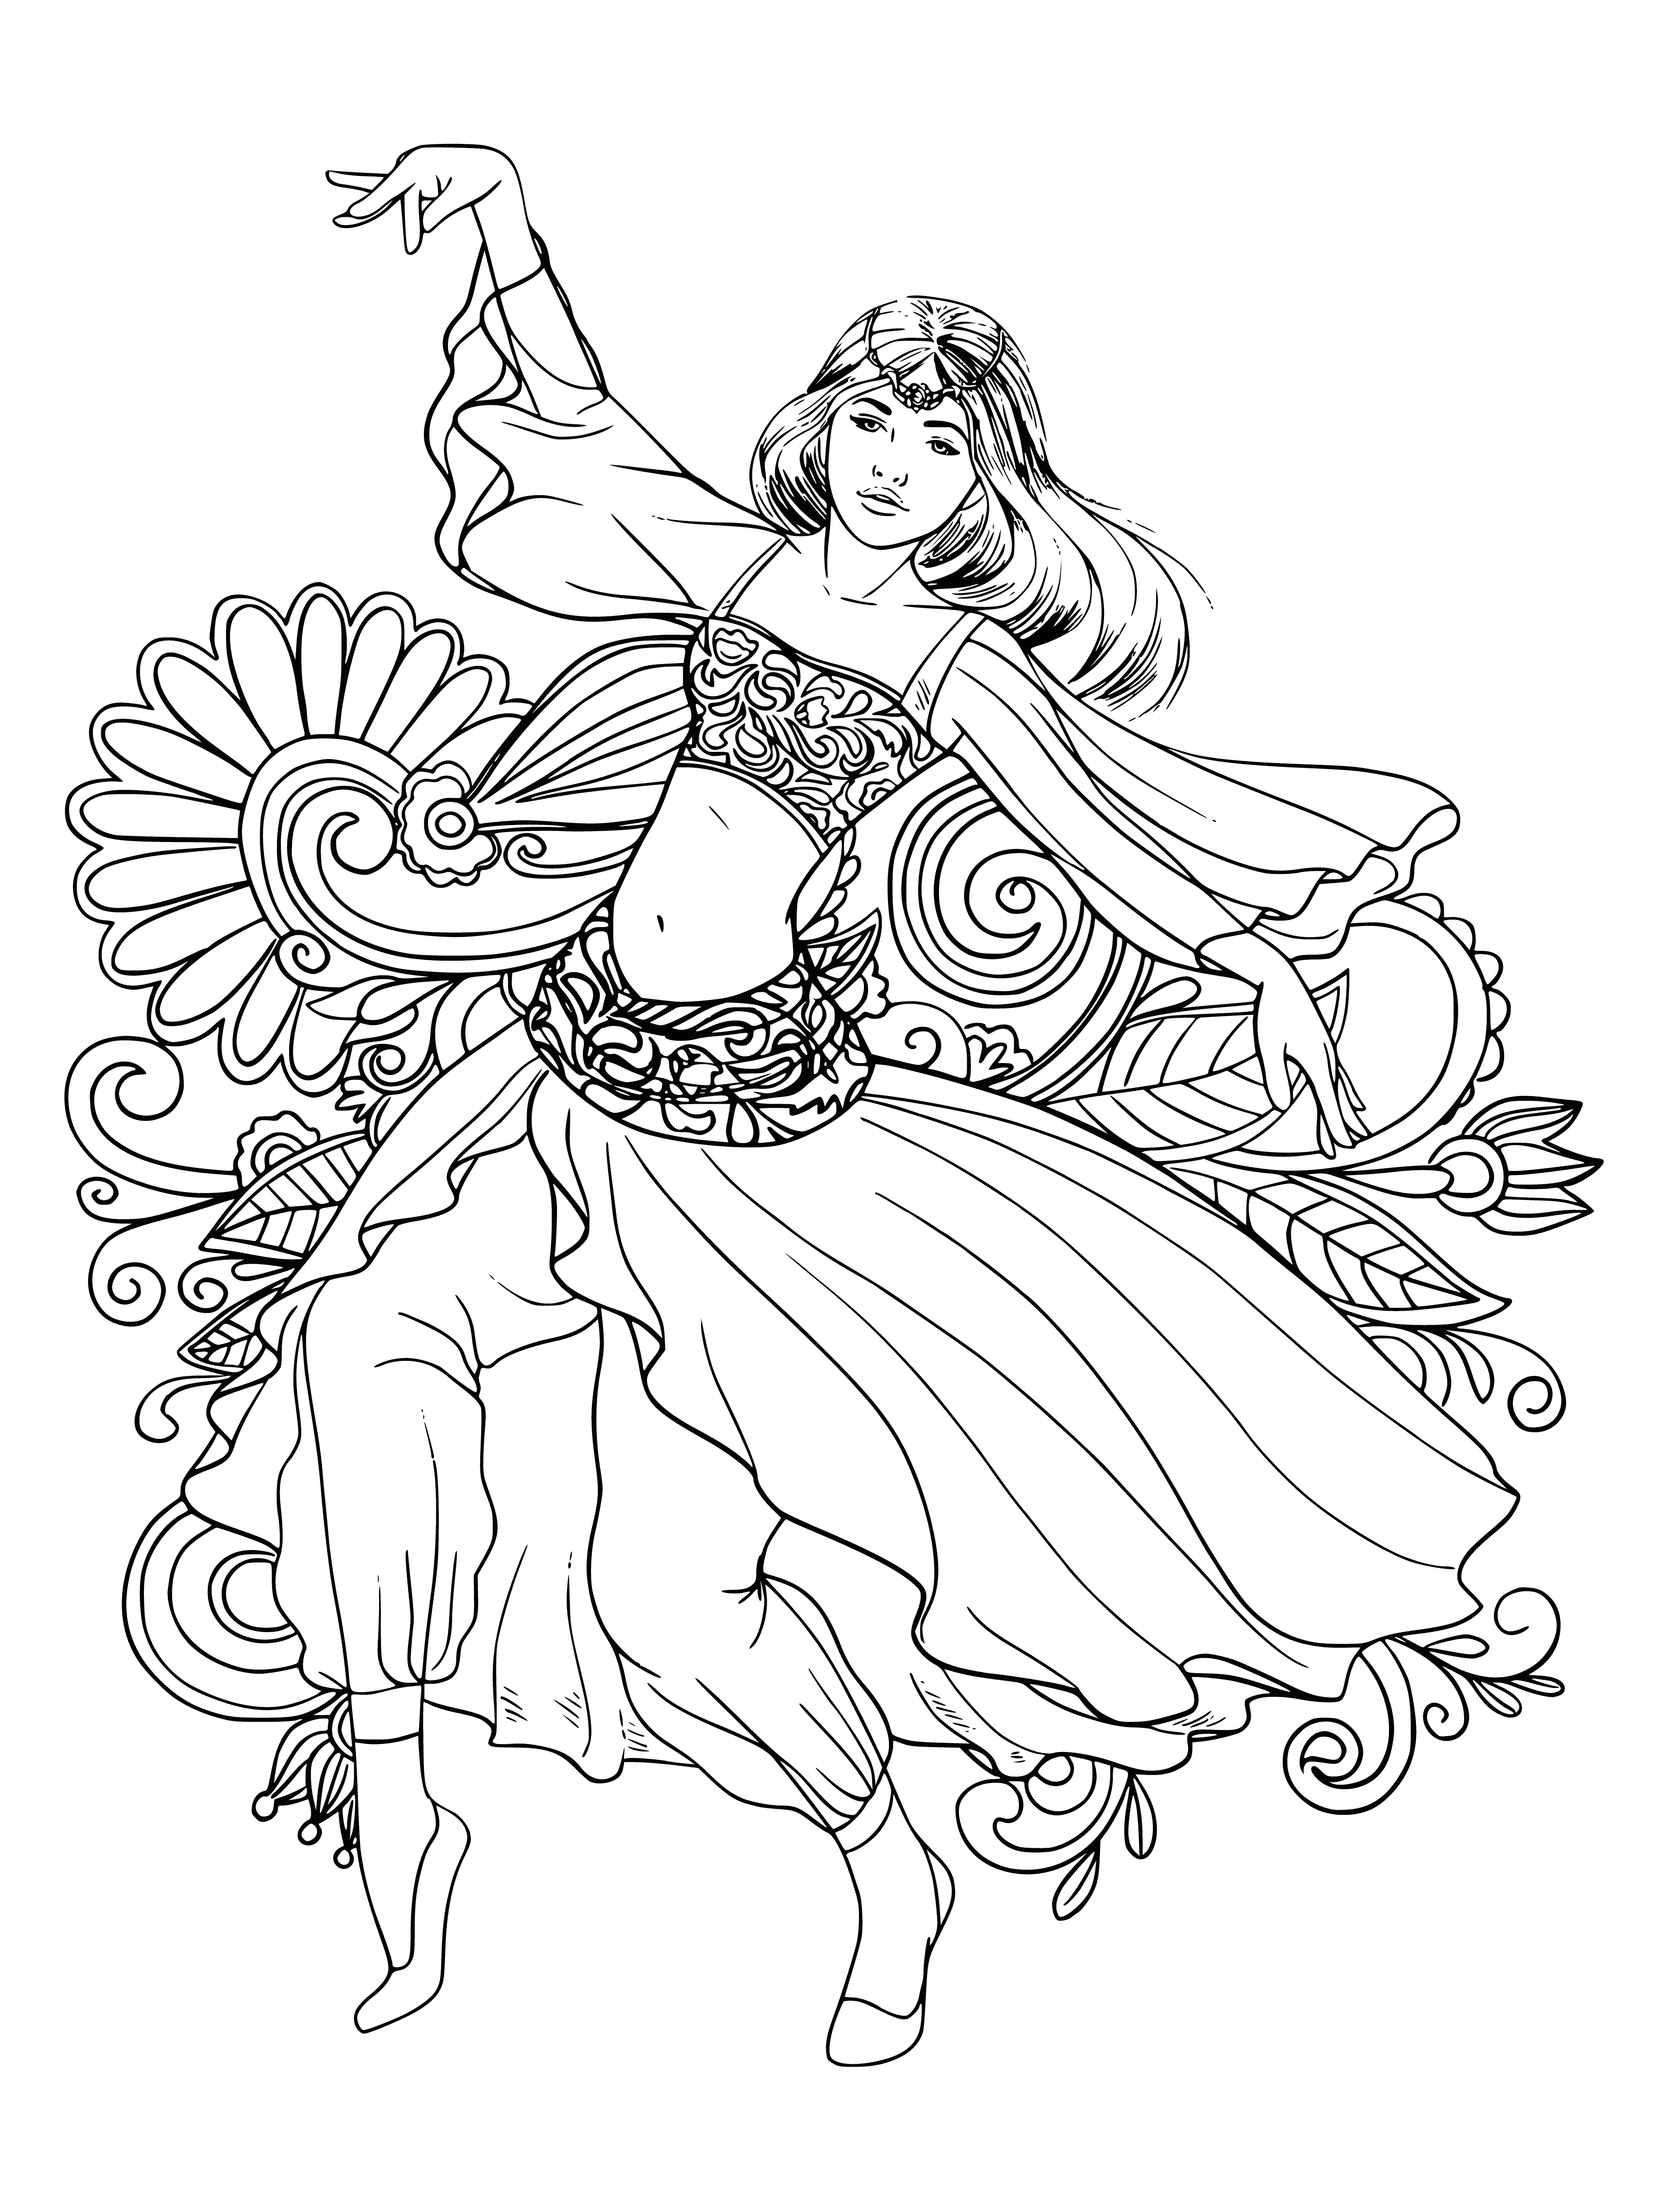 coloring page: Woman dances joyously in dress with flower in hair, headdress, arm above head, other at waist; carefree and joyful.